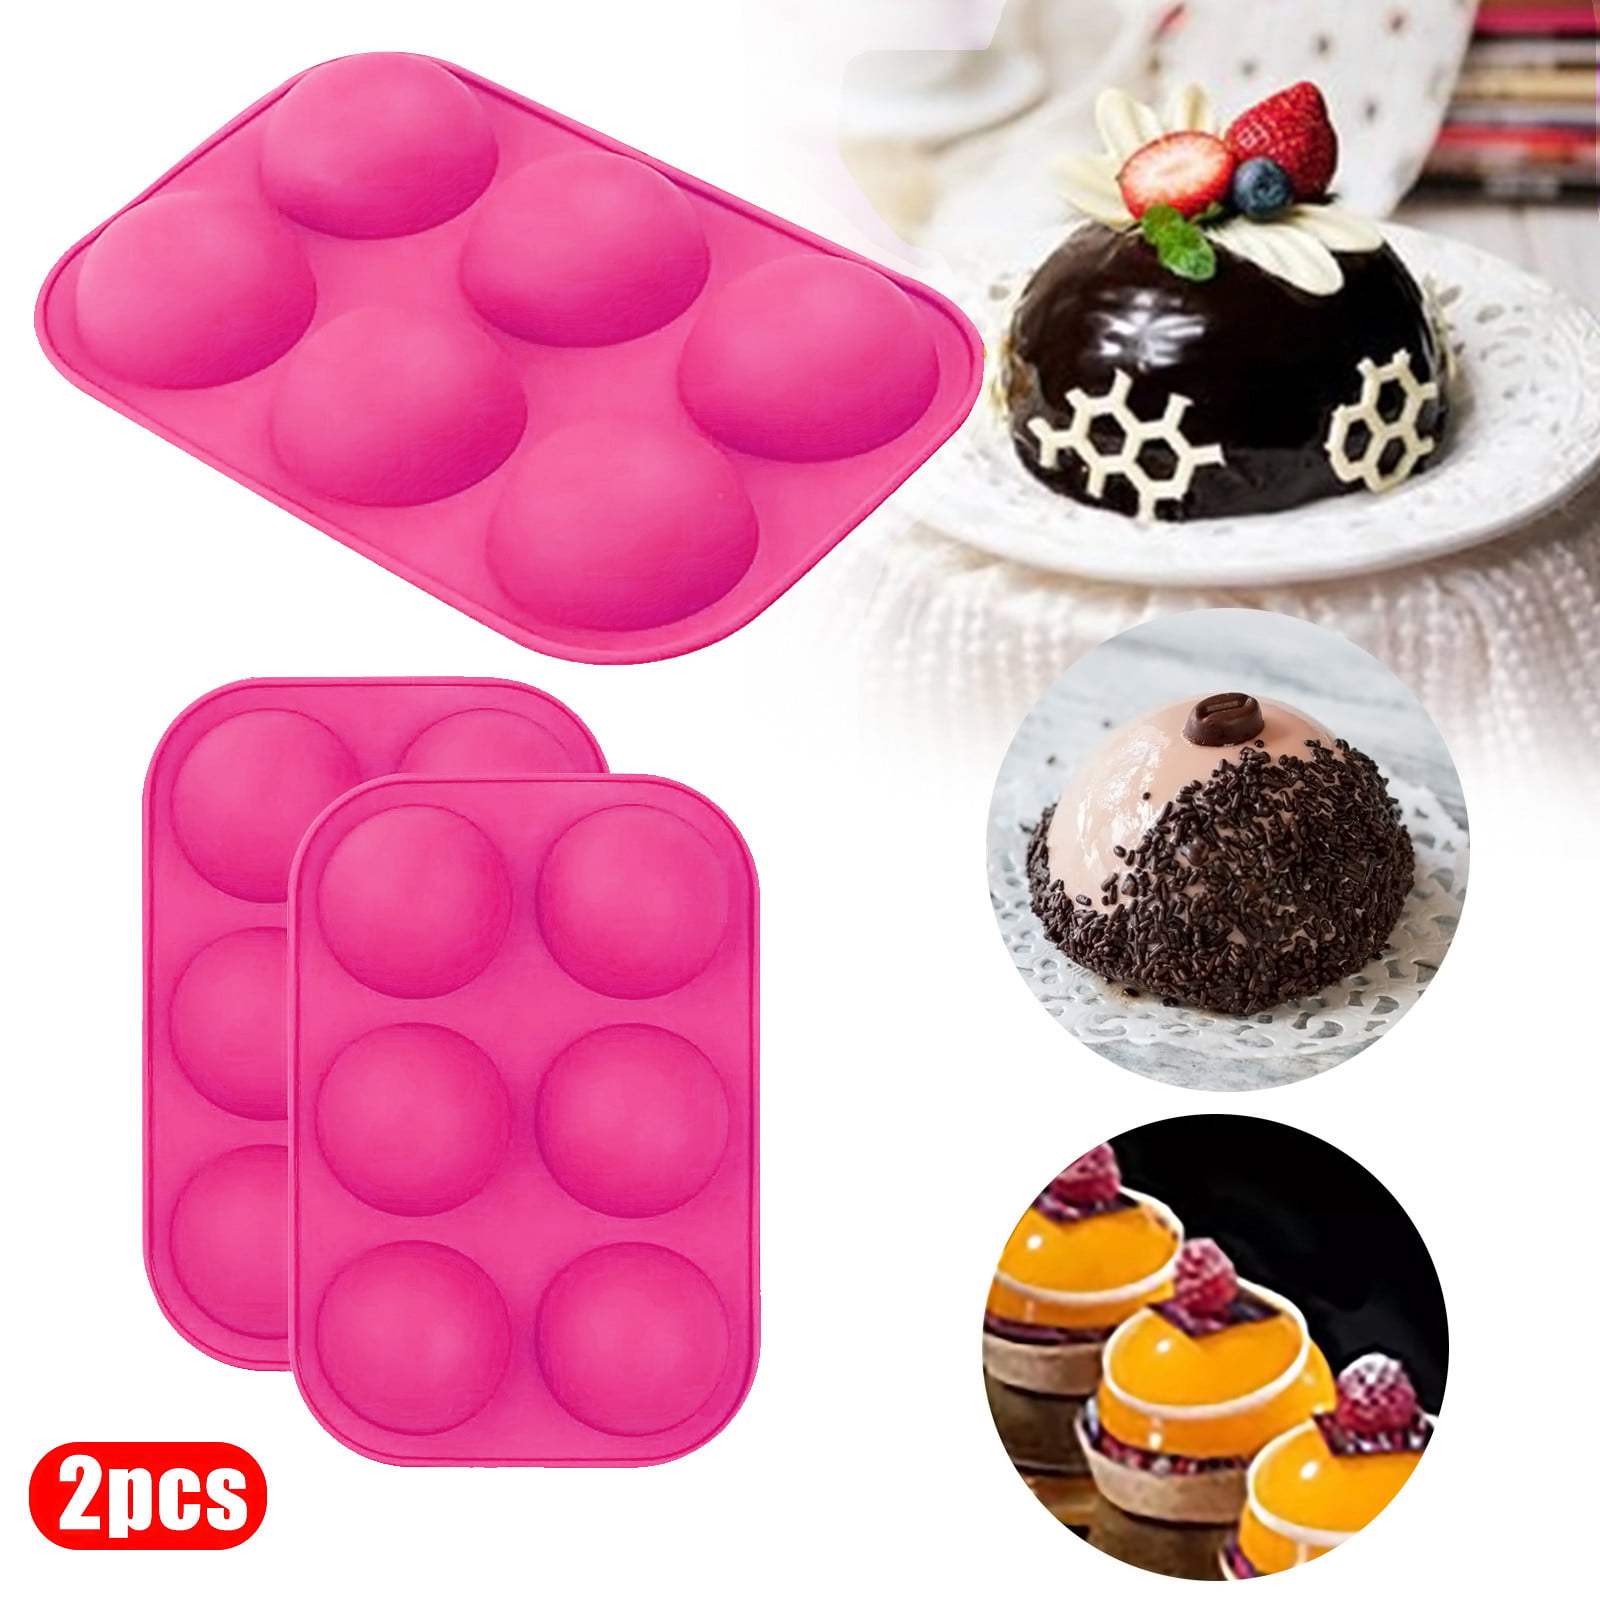 Half Ball Sphere Silicone Cake Mold Muffin Chocolate Mould Baking Pan Q9M8 